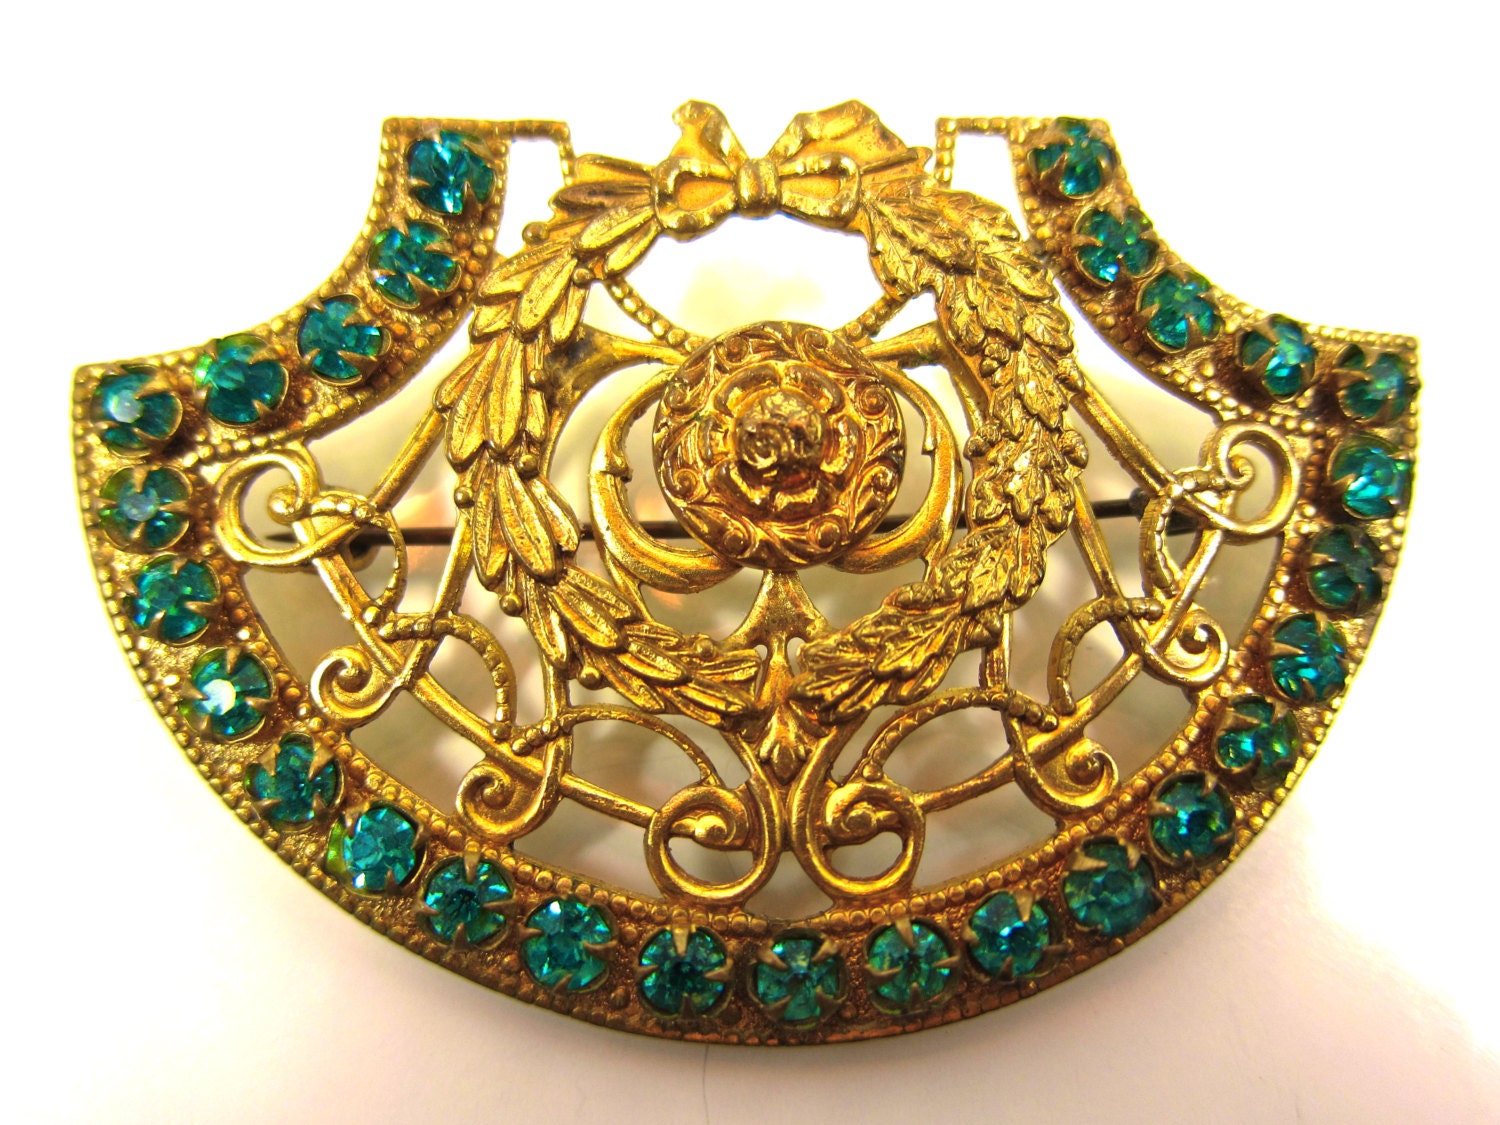 Vintage Ornate Gold Tone And Teal Blue/Green Crystal Brooch/Pin-Free Gift With Purchase - SJWVintage